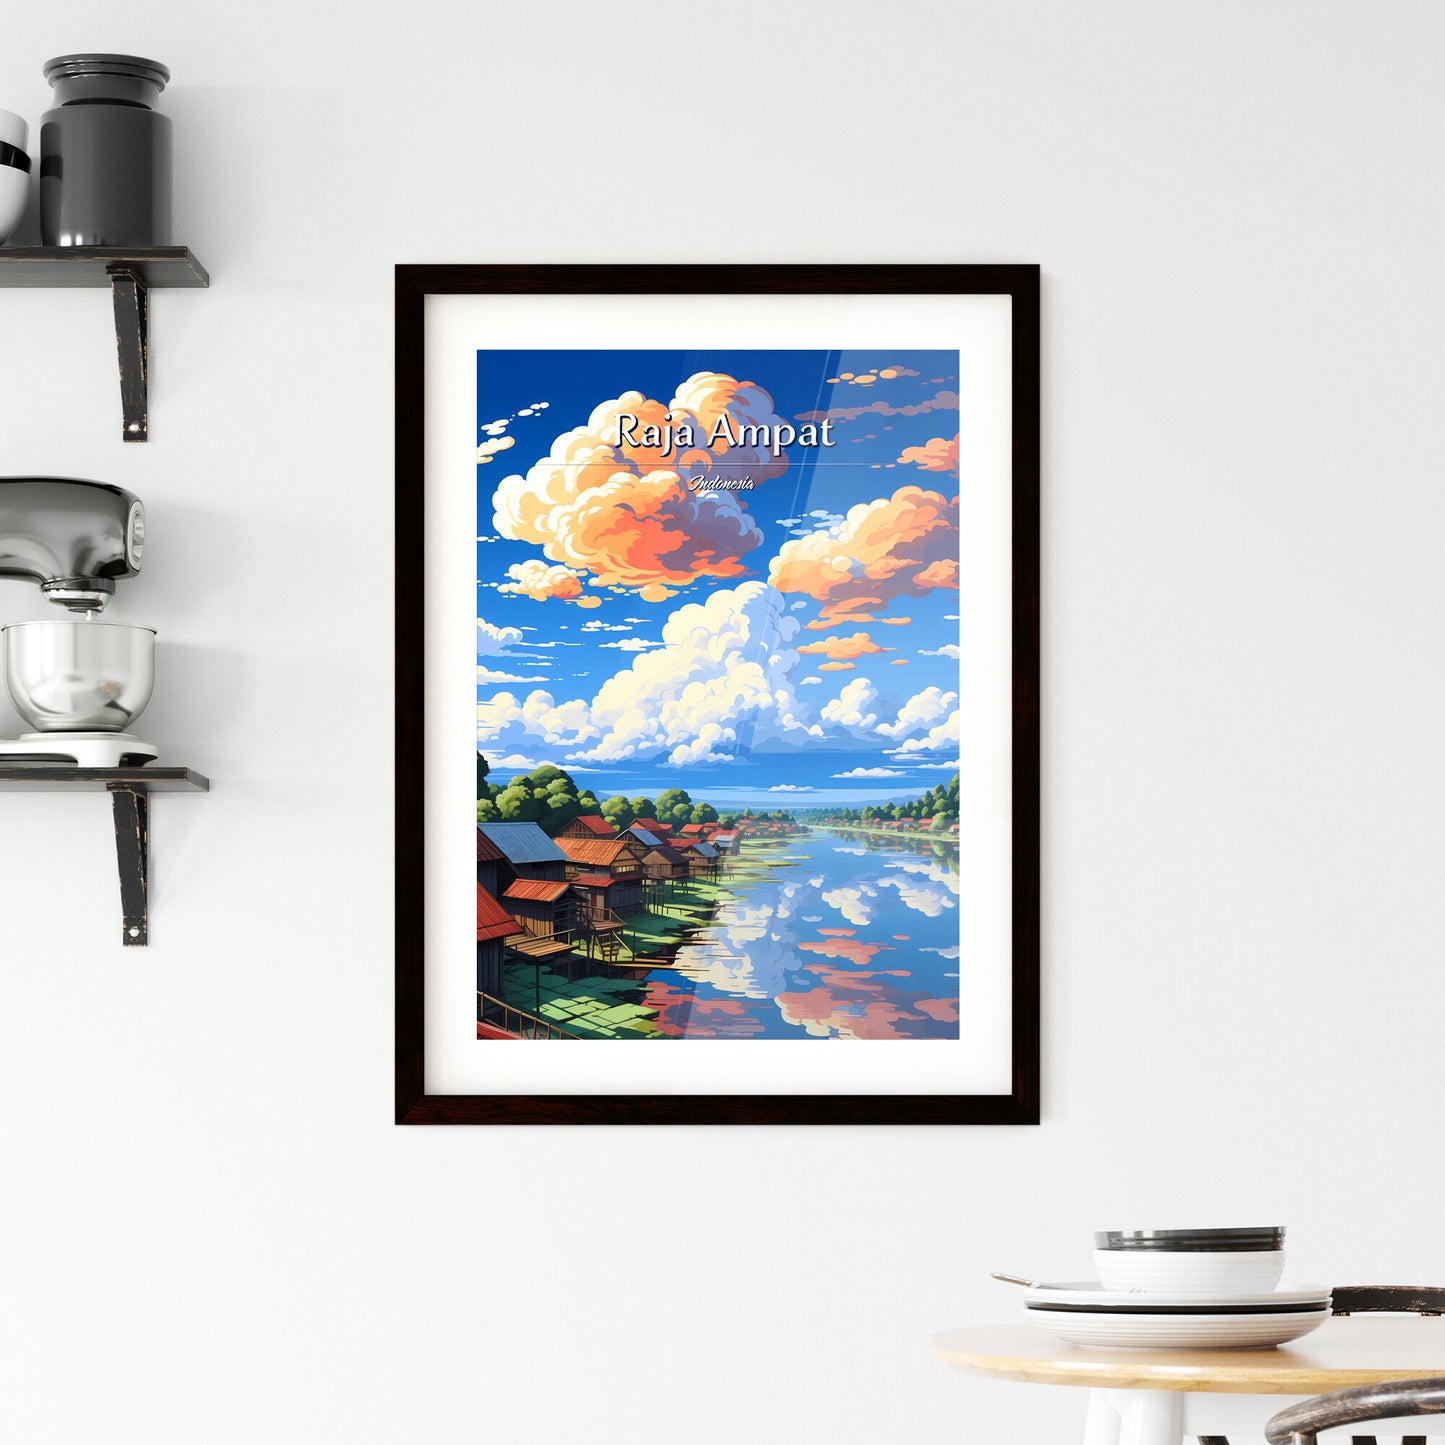 On the roofs of Raja Ampat, Indonesia - Art print of a group of houses on stilts by a river Default Title